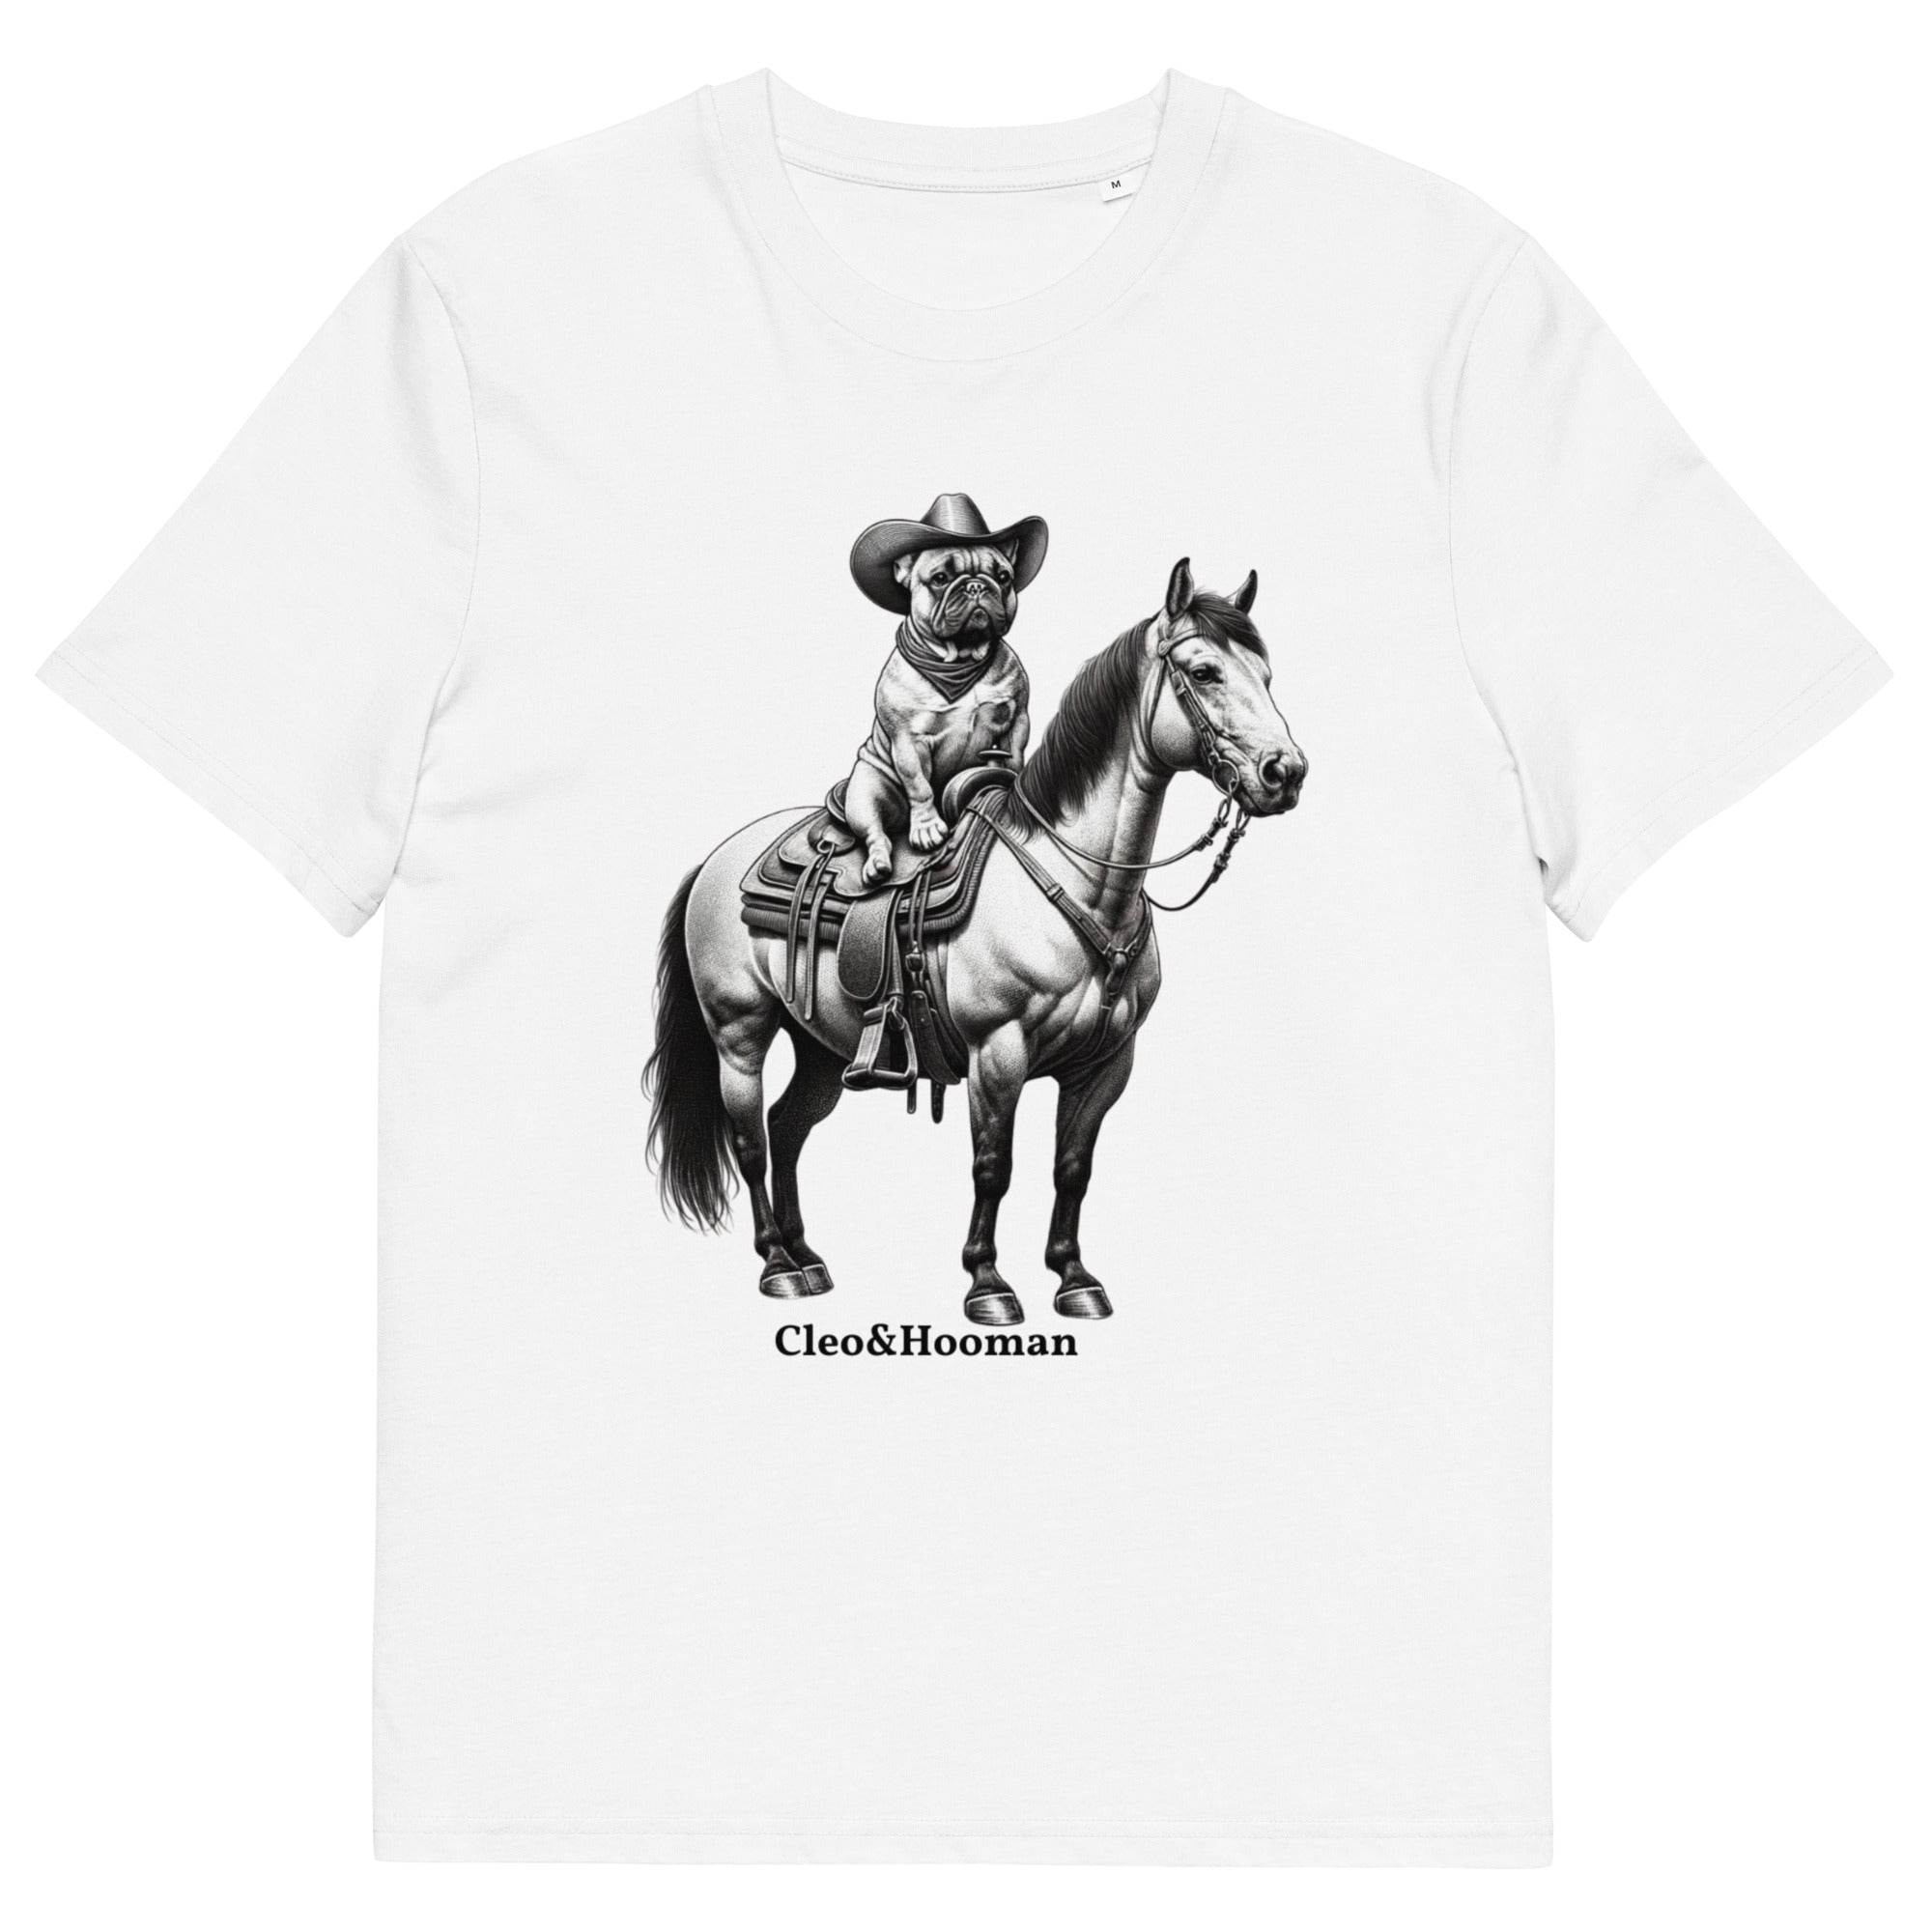 It's Not My First Rodeo Tee